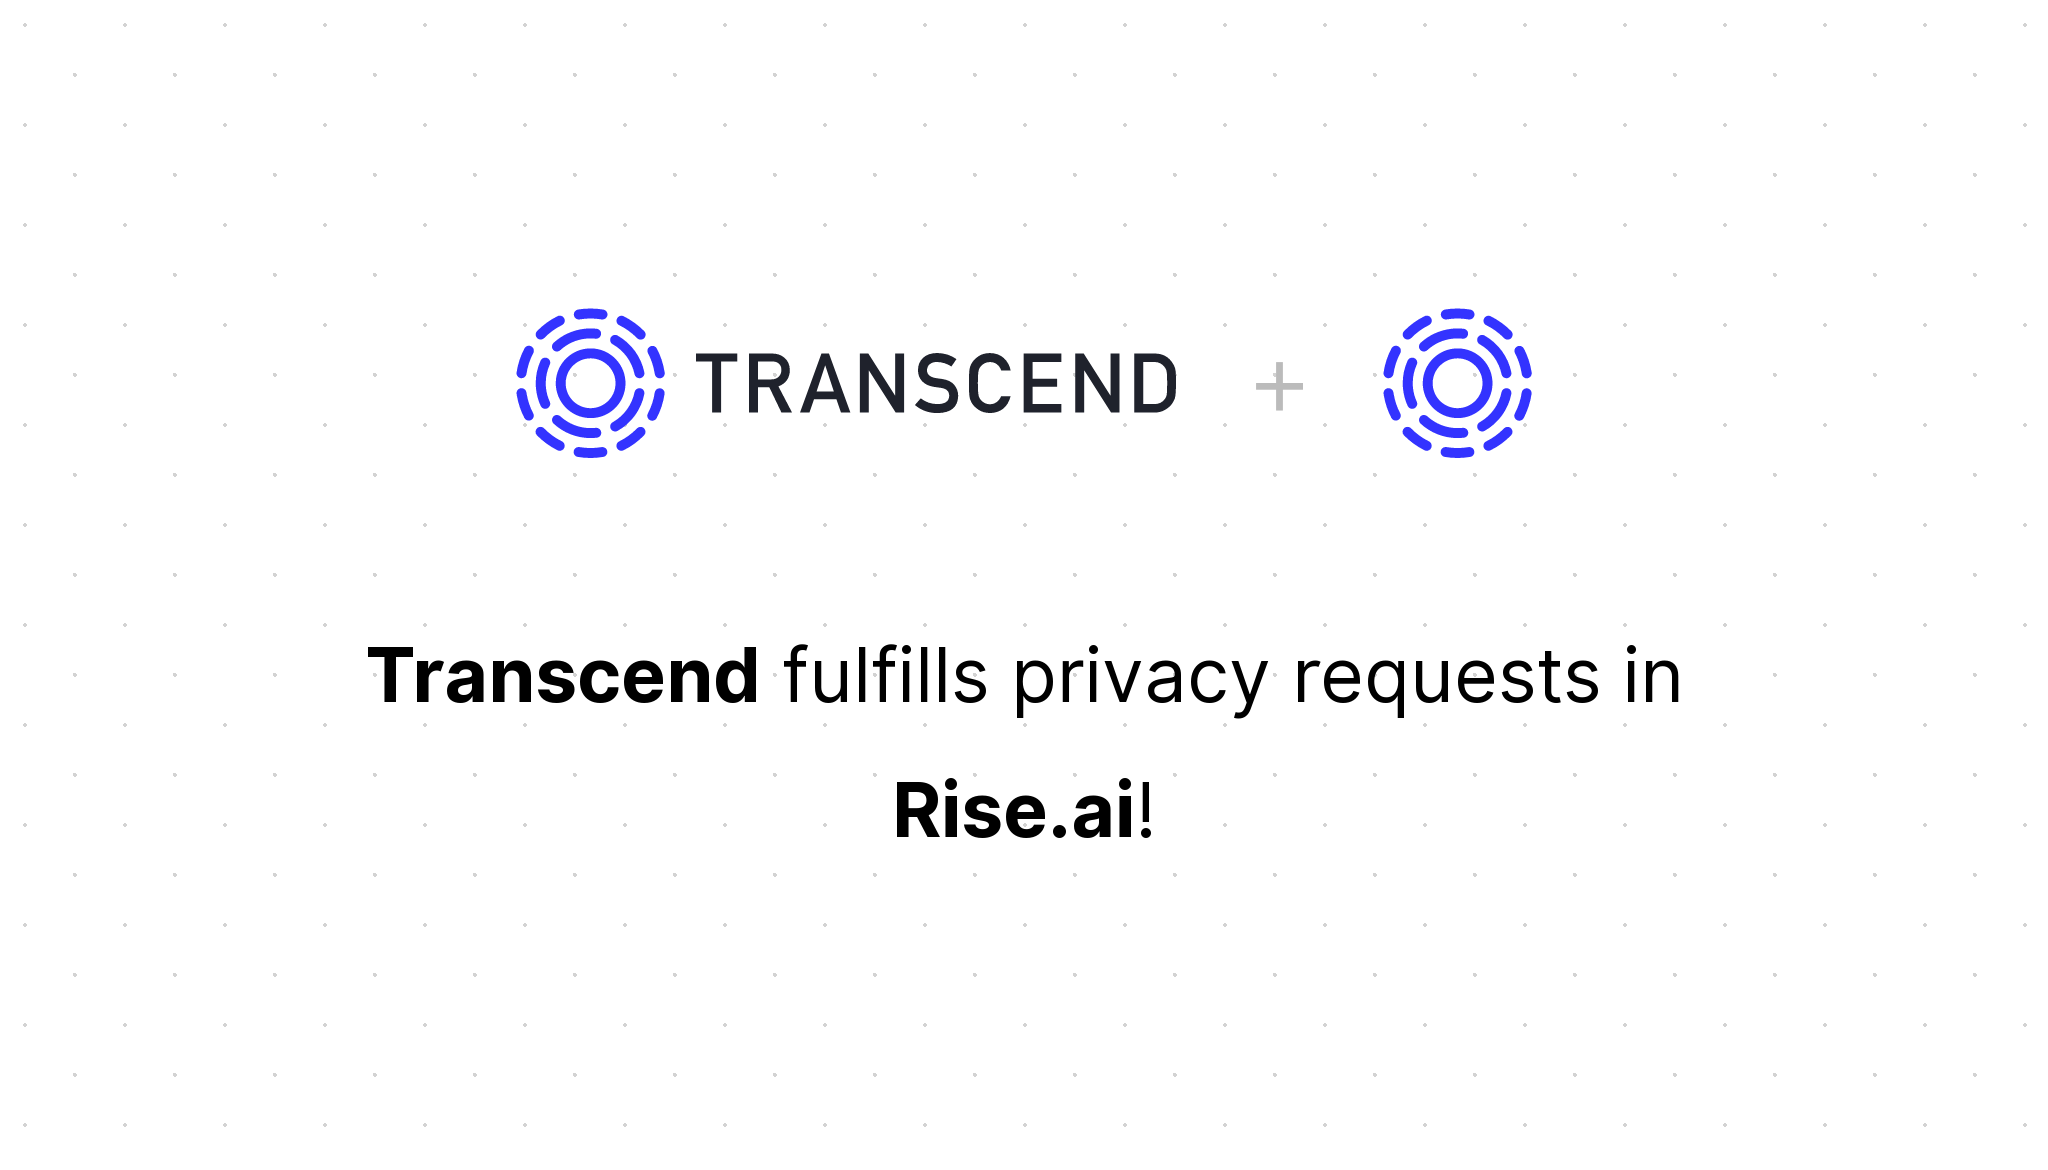 Transcend Data Privacy Infrastructure